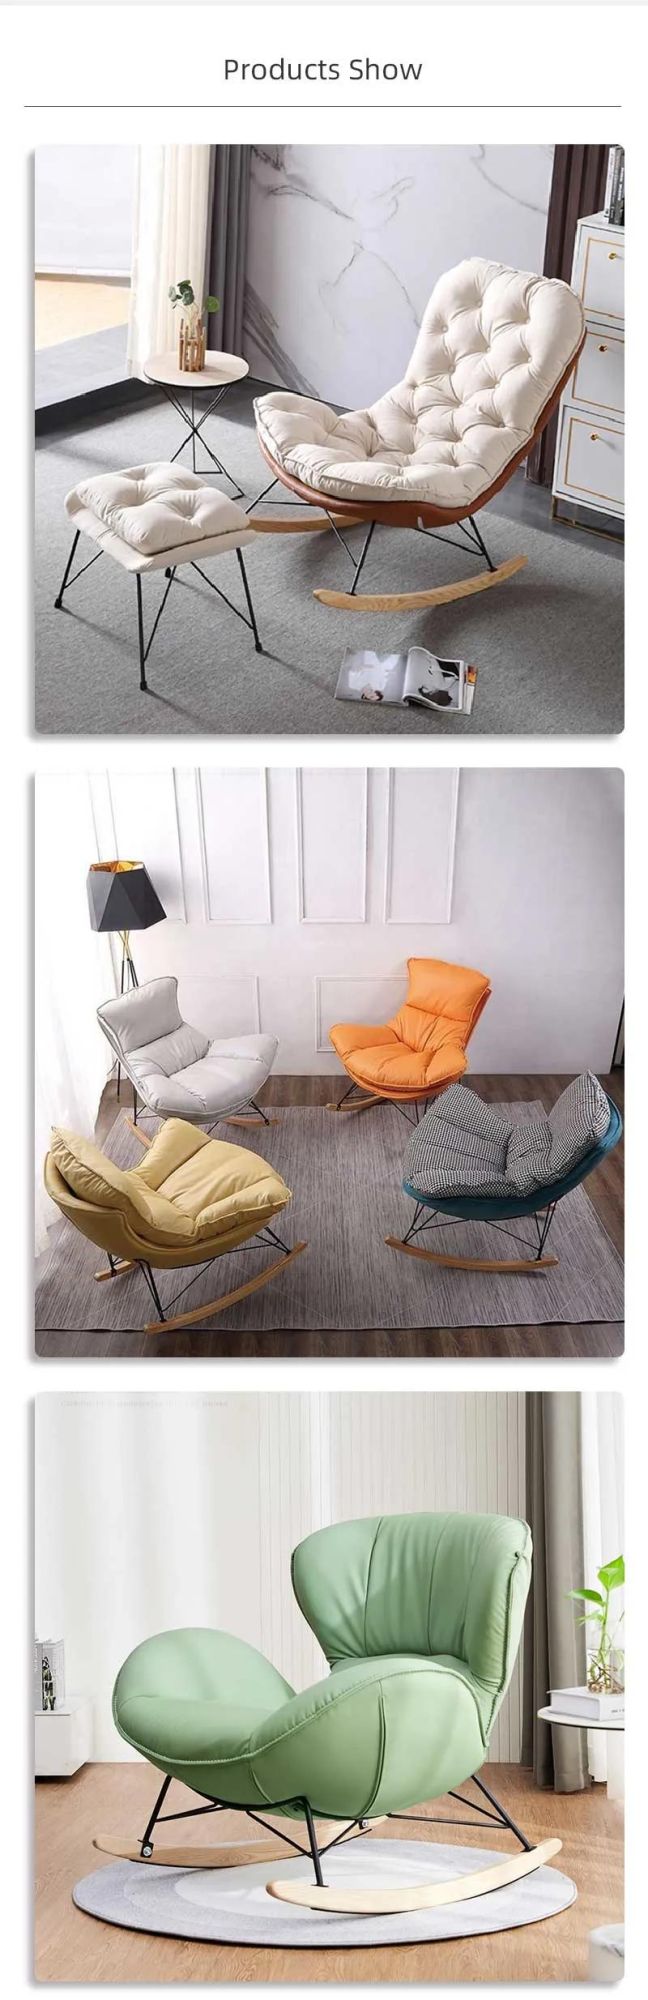 Hotel Furniture Metal Leisure Fabric Reception Room Living Room Outdoor Chair